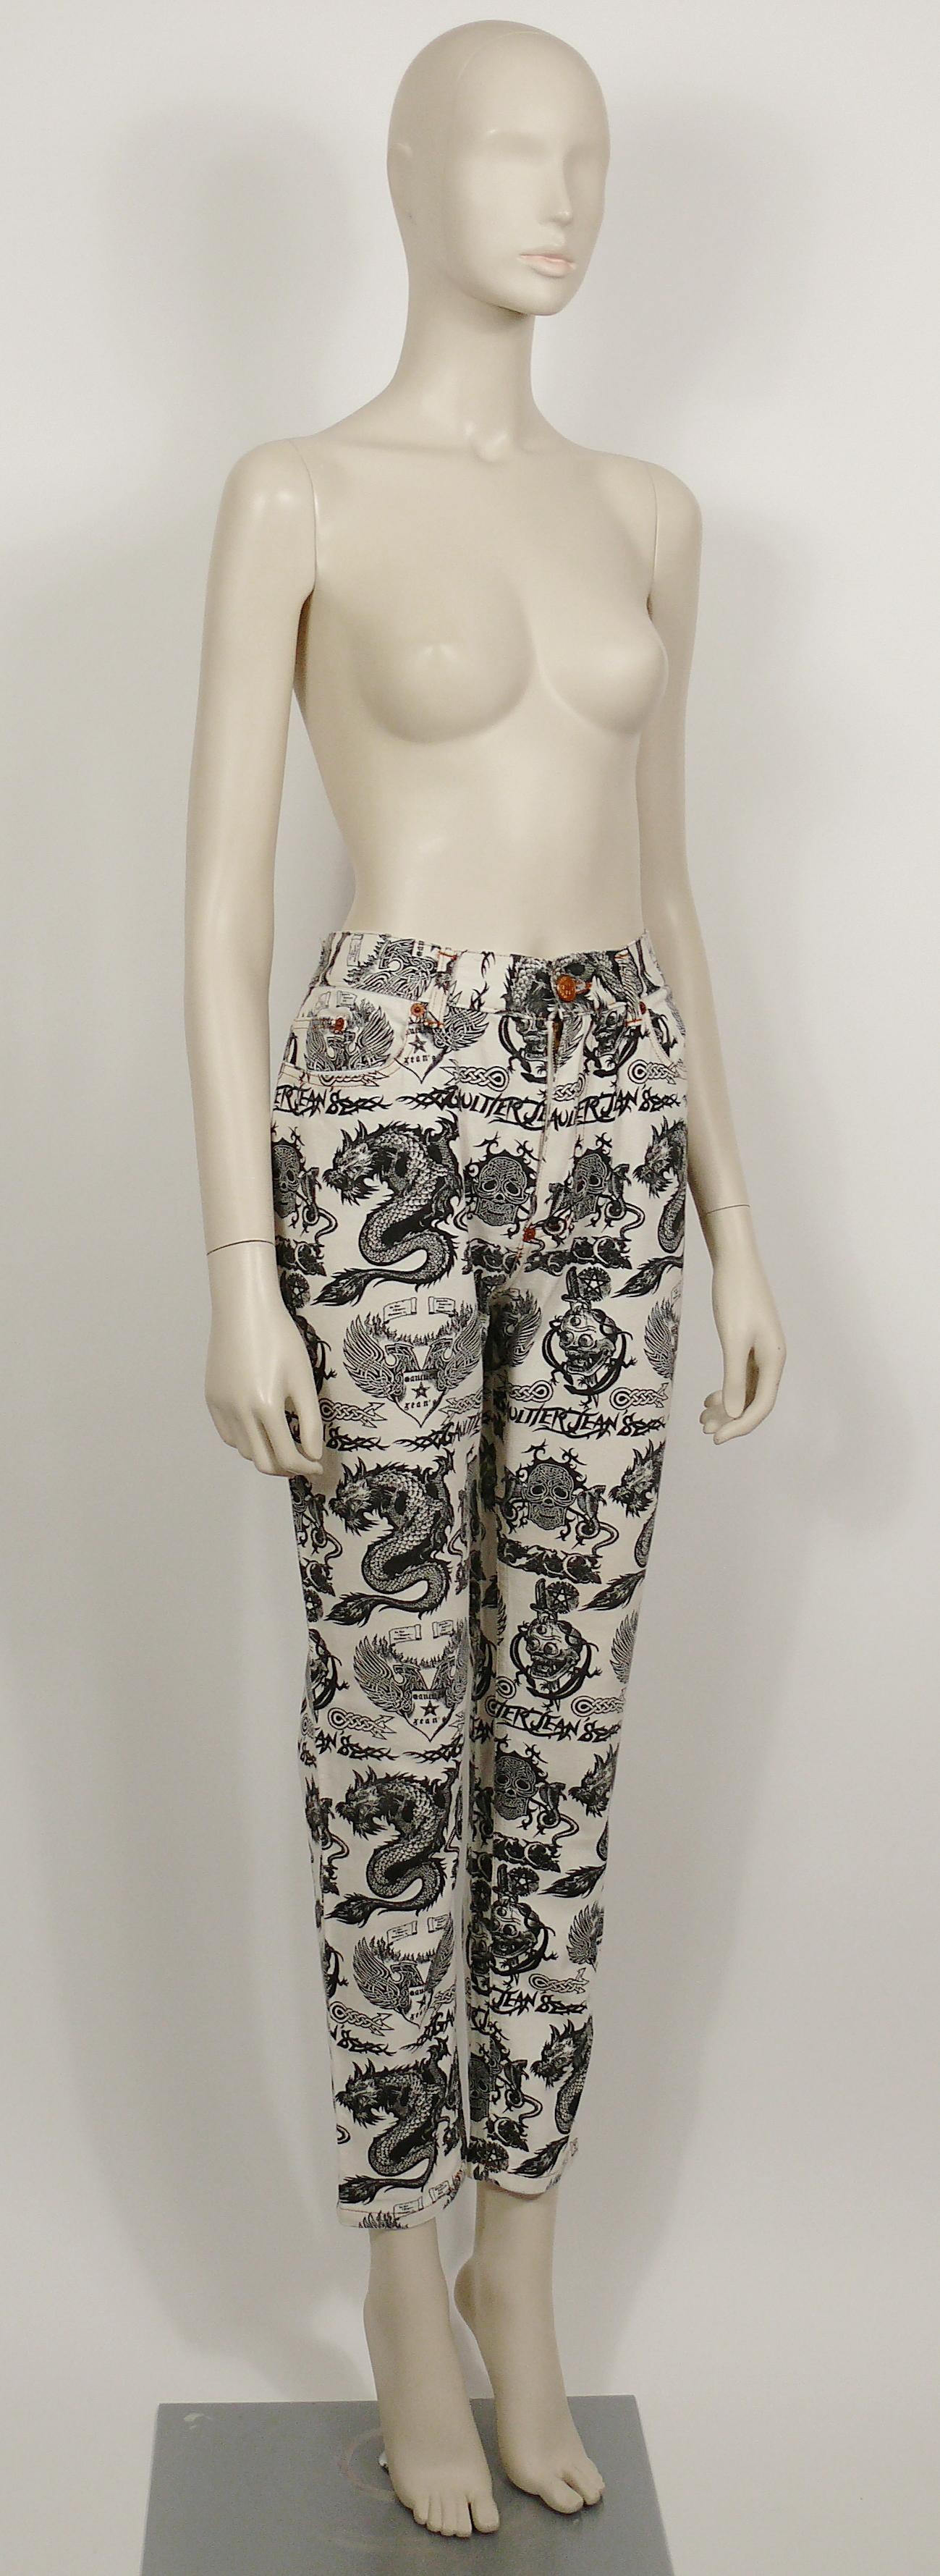 JEAN PAUL GAULTIER vintage off-white pants trousers featuring black tattoo print of barbed wire GAULTIER JEAN'S, dragons, skulls and double head eagles.

These trousers feature :
- Off-white cotton blend fabric with black print details all-over.
-